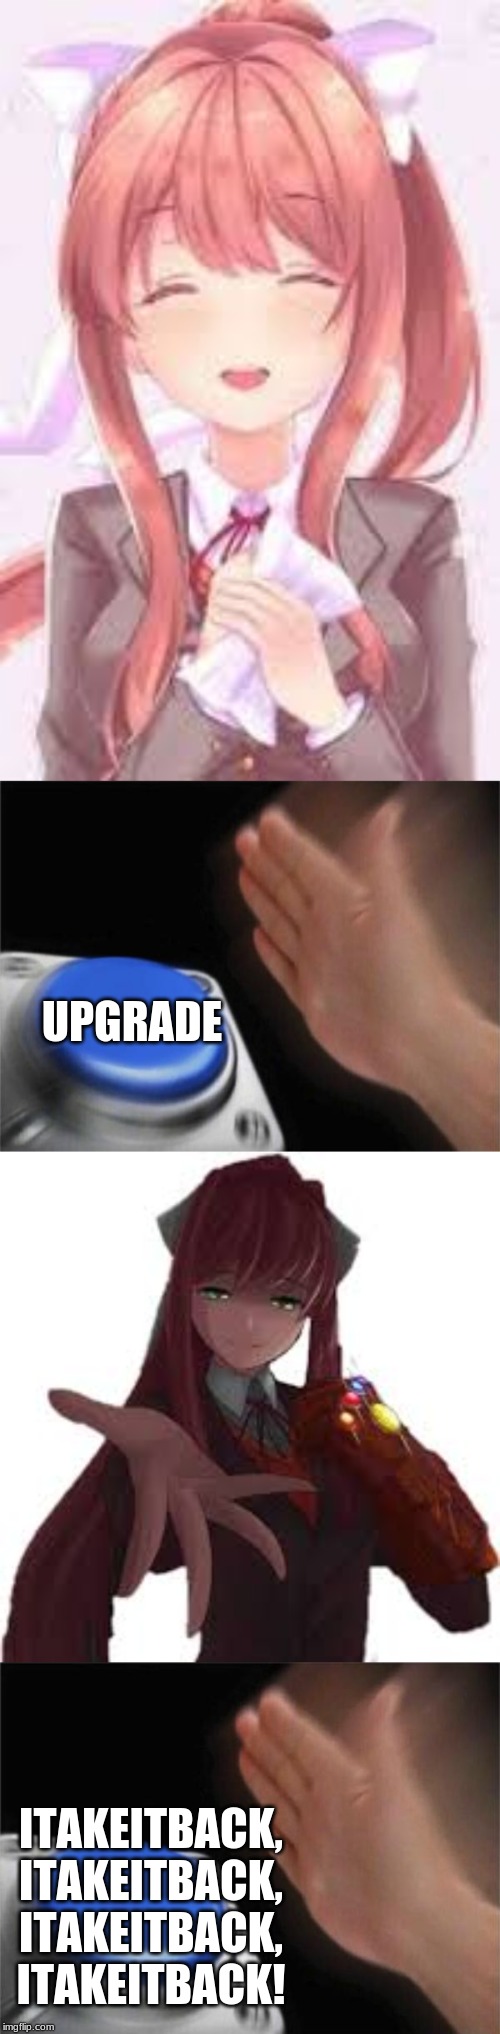 I've done a terrible thing. | UPGRADE; ITAKEITBACK,
ITAKEITBACK,
ITAKEITBACK,
ITAKEITBACK! | image tagged in memes,blank nut button,ddlc | made w/ Imgflip meme maker